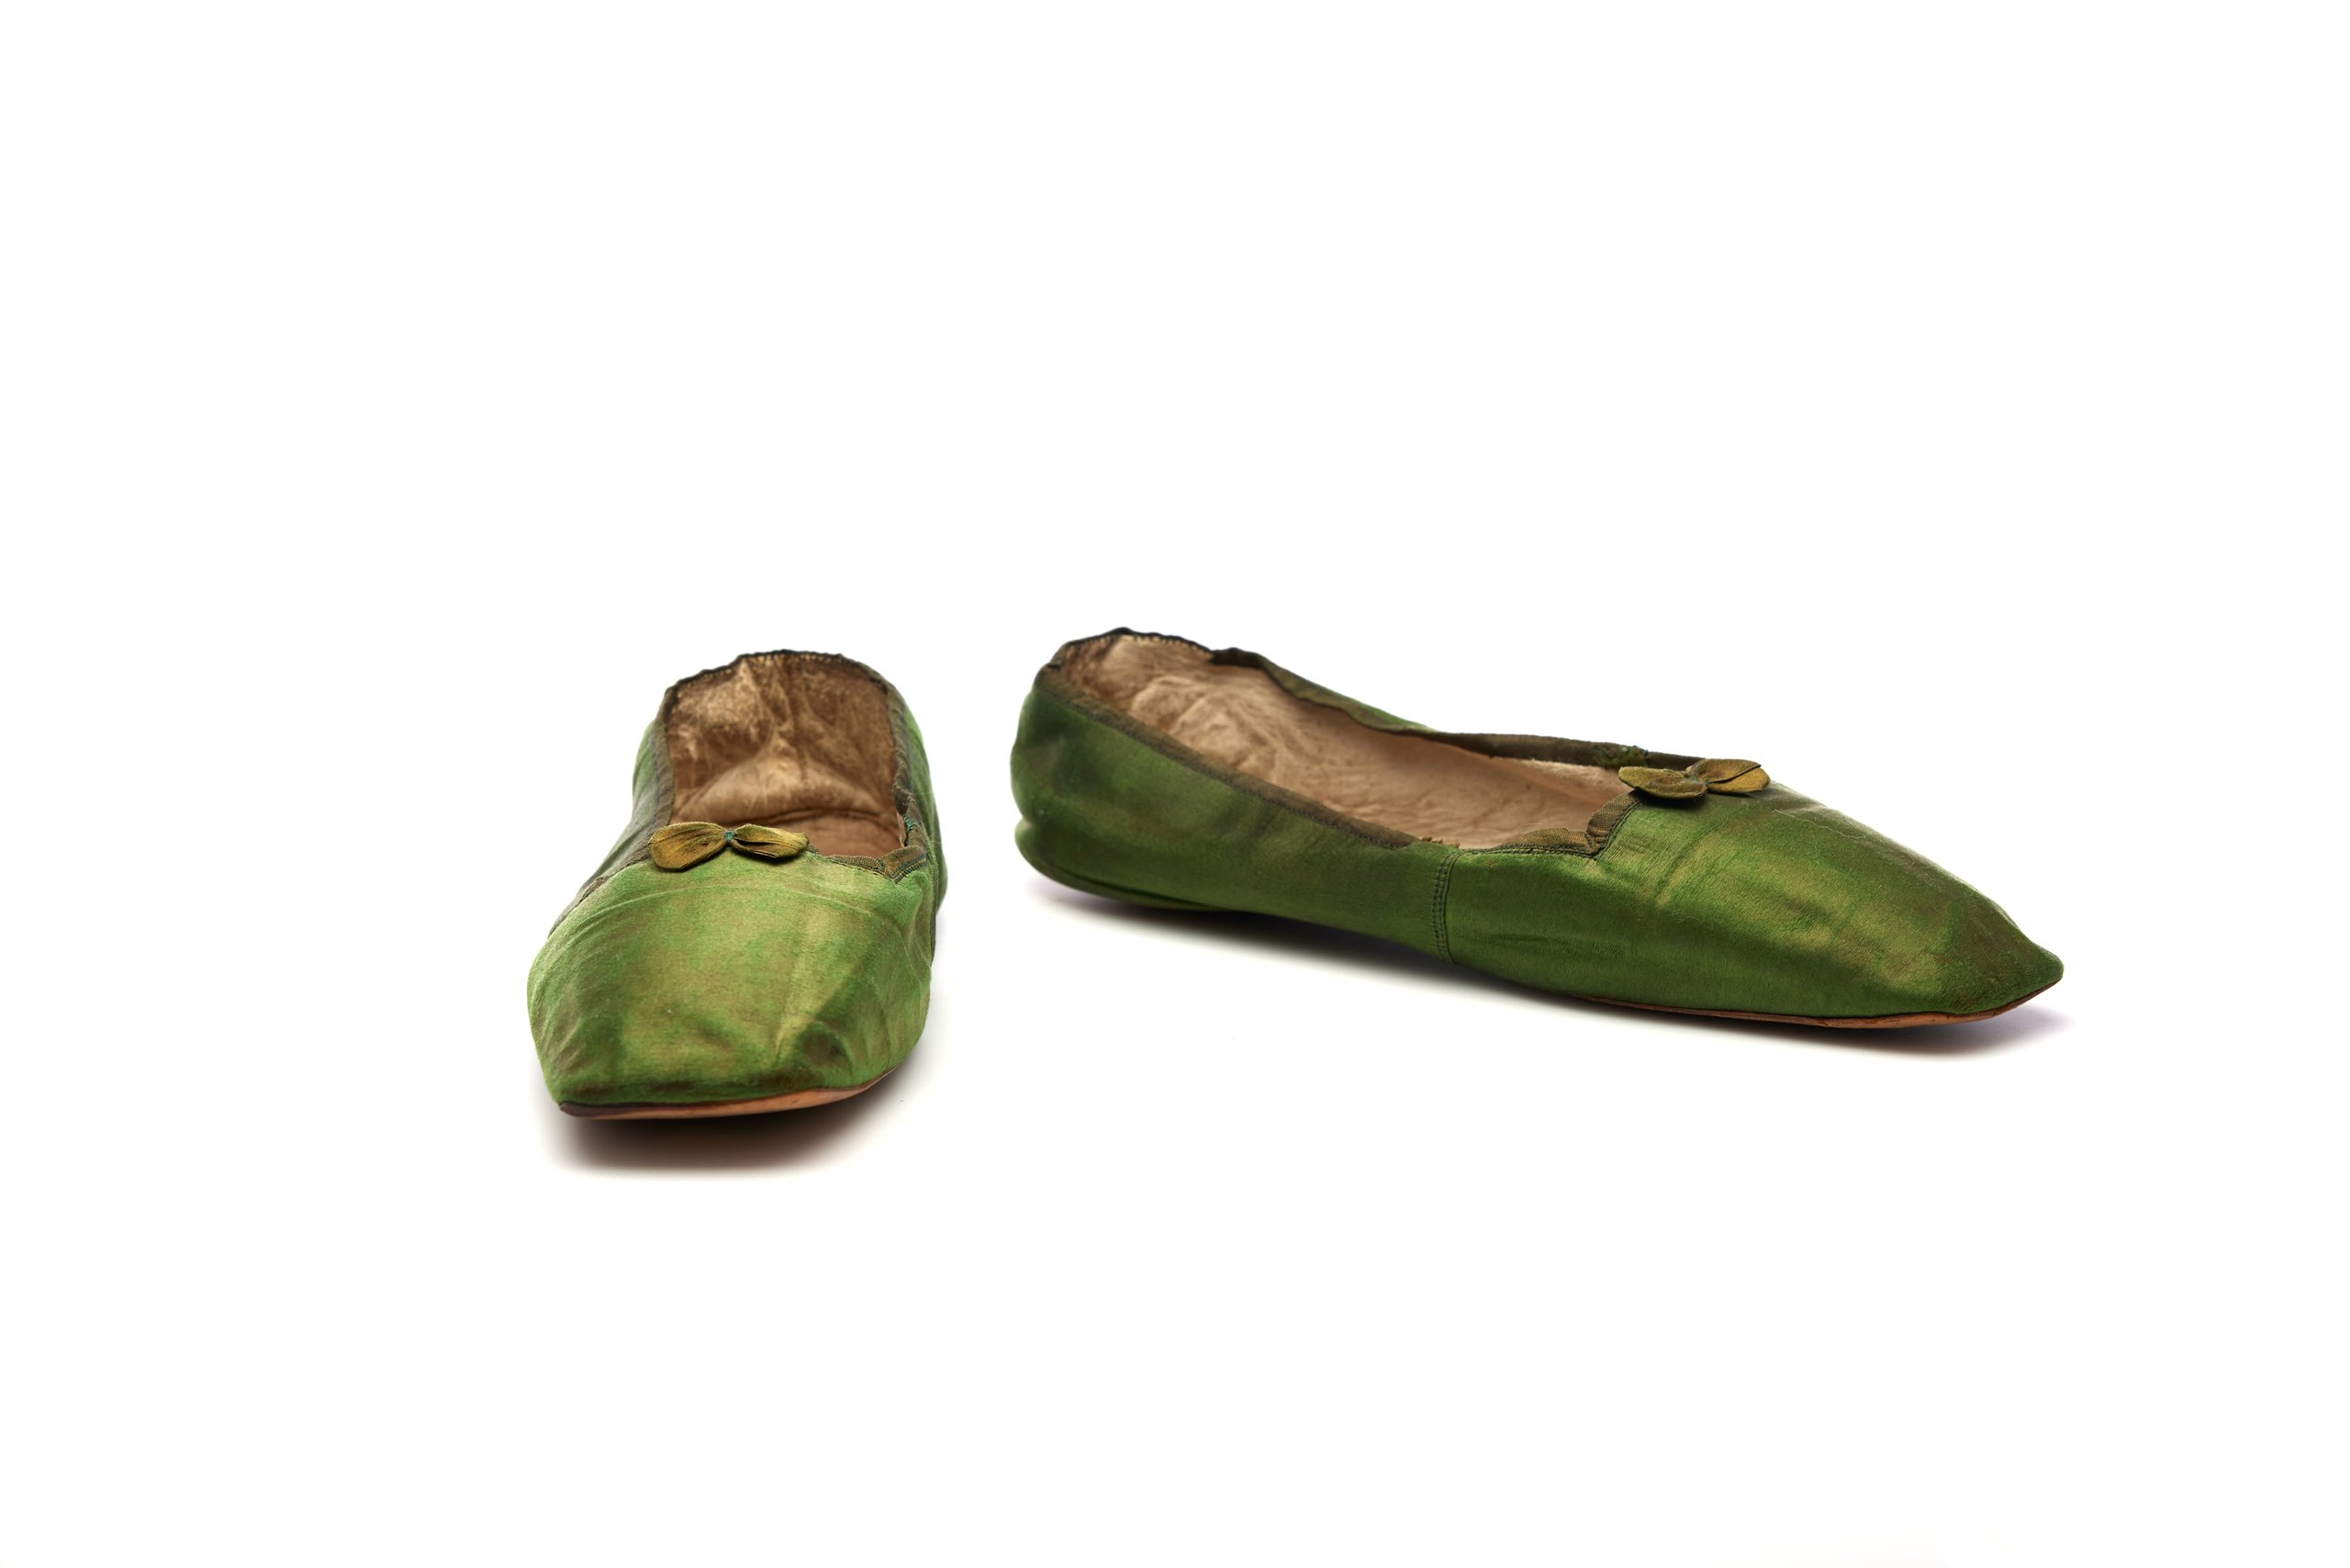 Pair of slip on shoes by Gundry & Sons